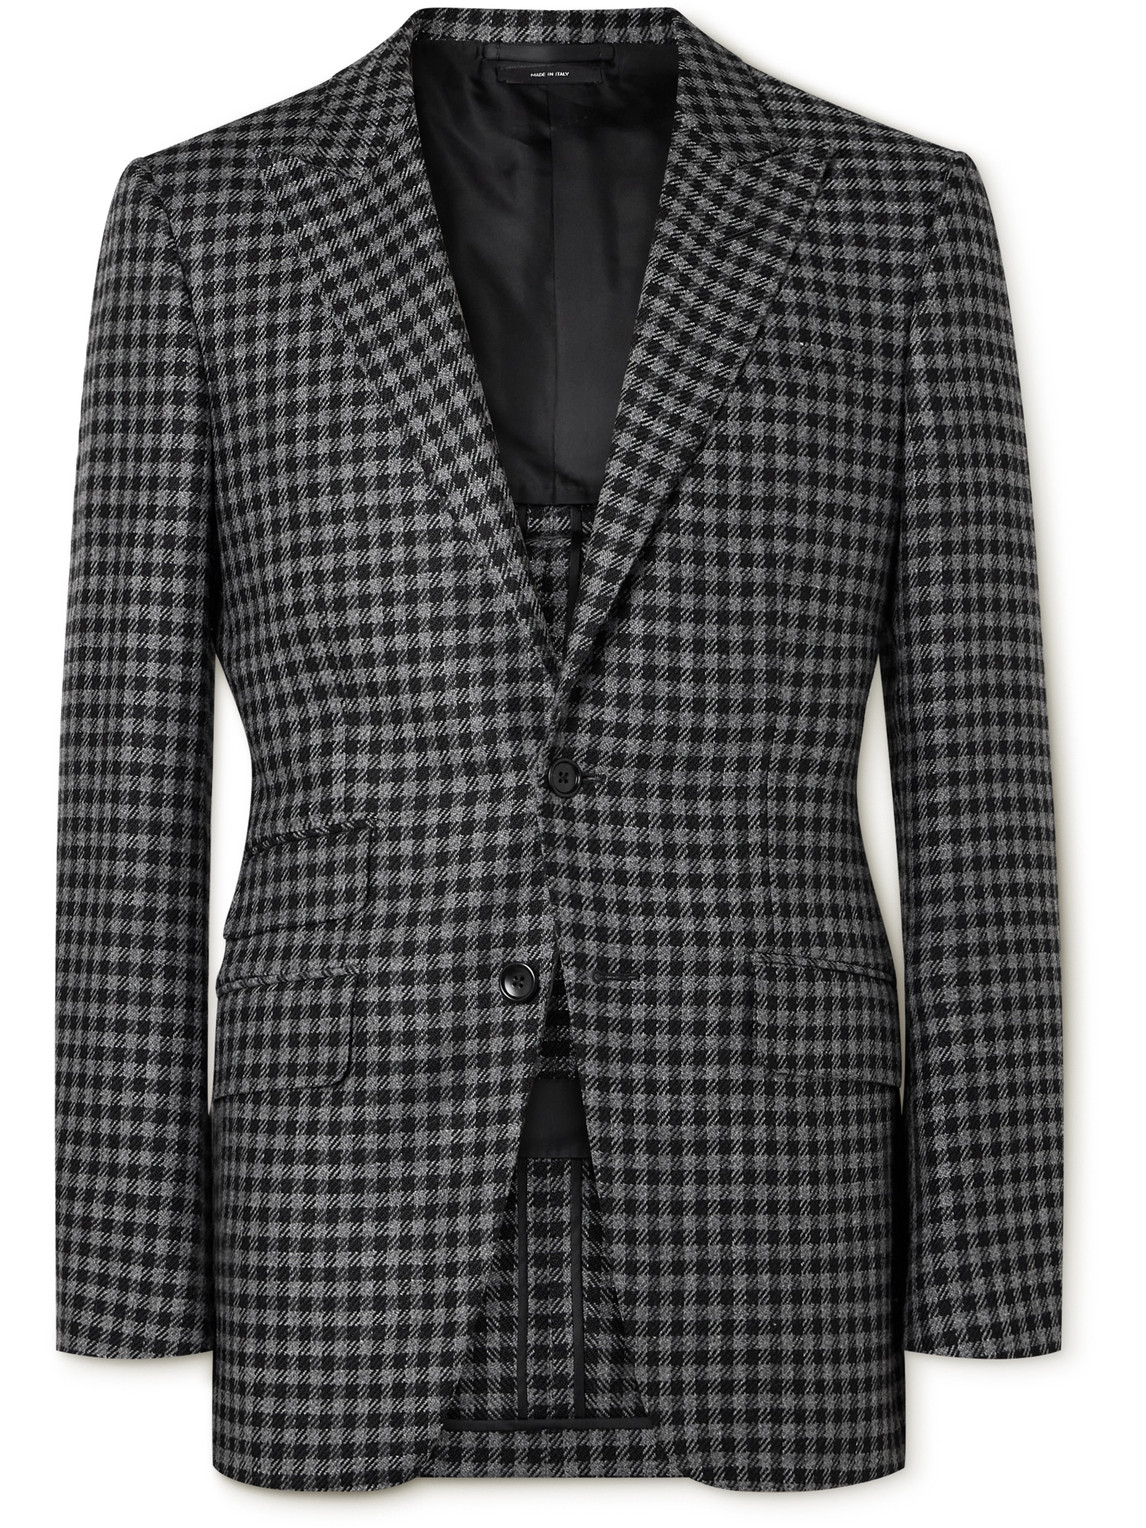 O'Connor Slim-Fit Gingham Wool, Mohair and Cashmere-Blend Suit Jacket